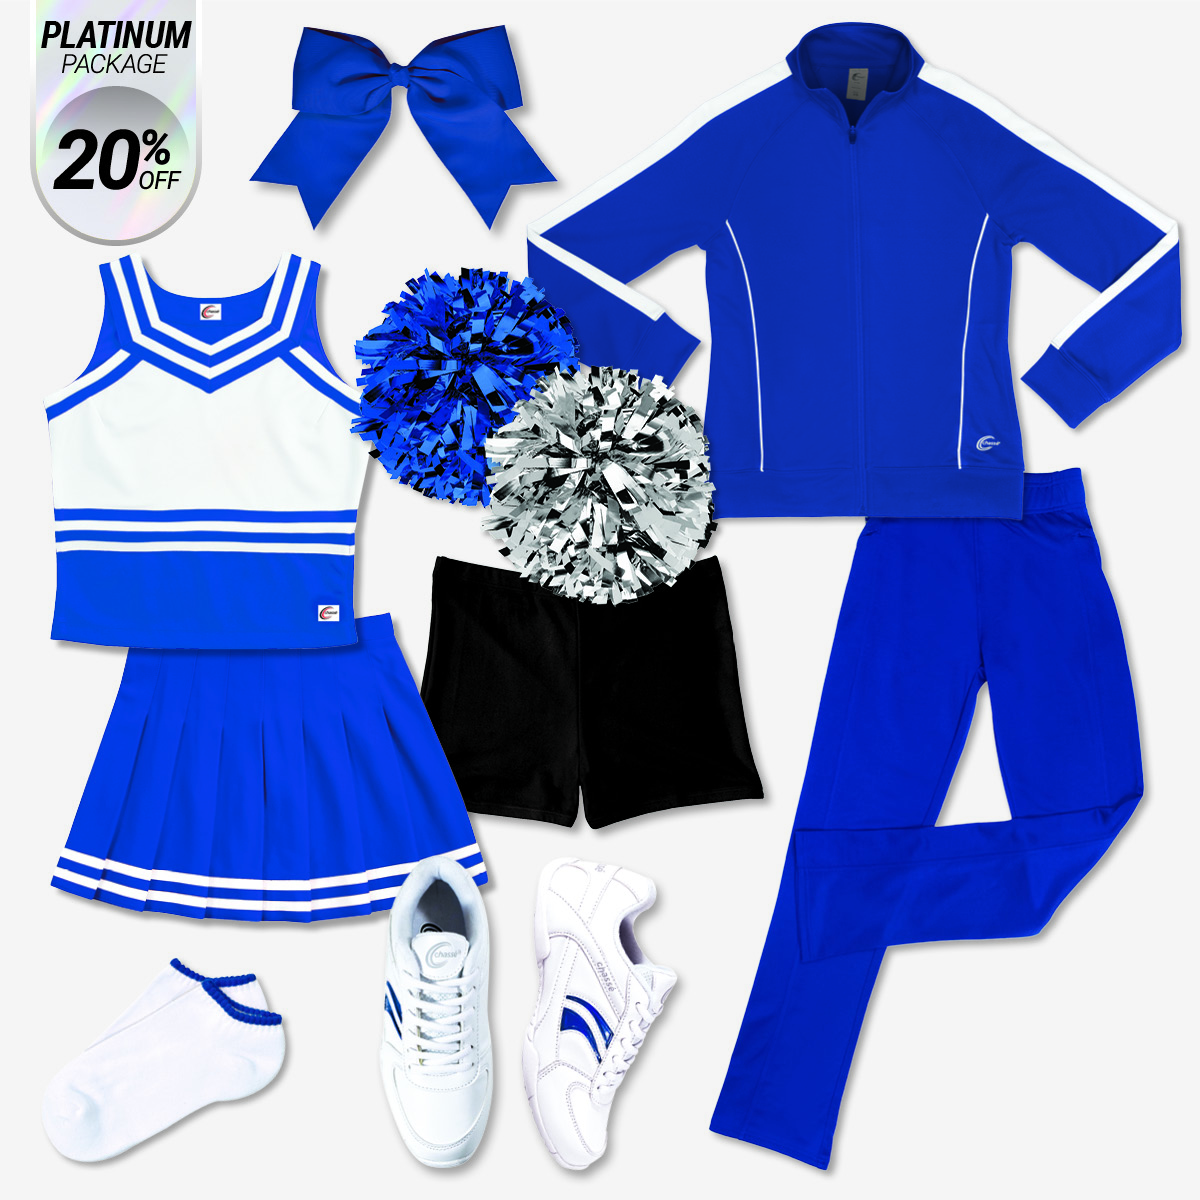 Cheer Uniform Packages: Cheerleading Packages with Uniform, Socks, Poms and  Shoes